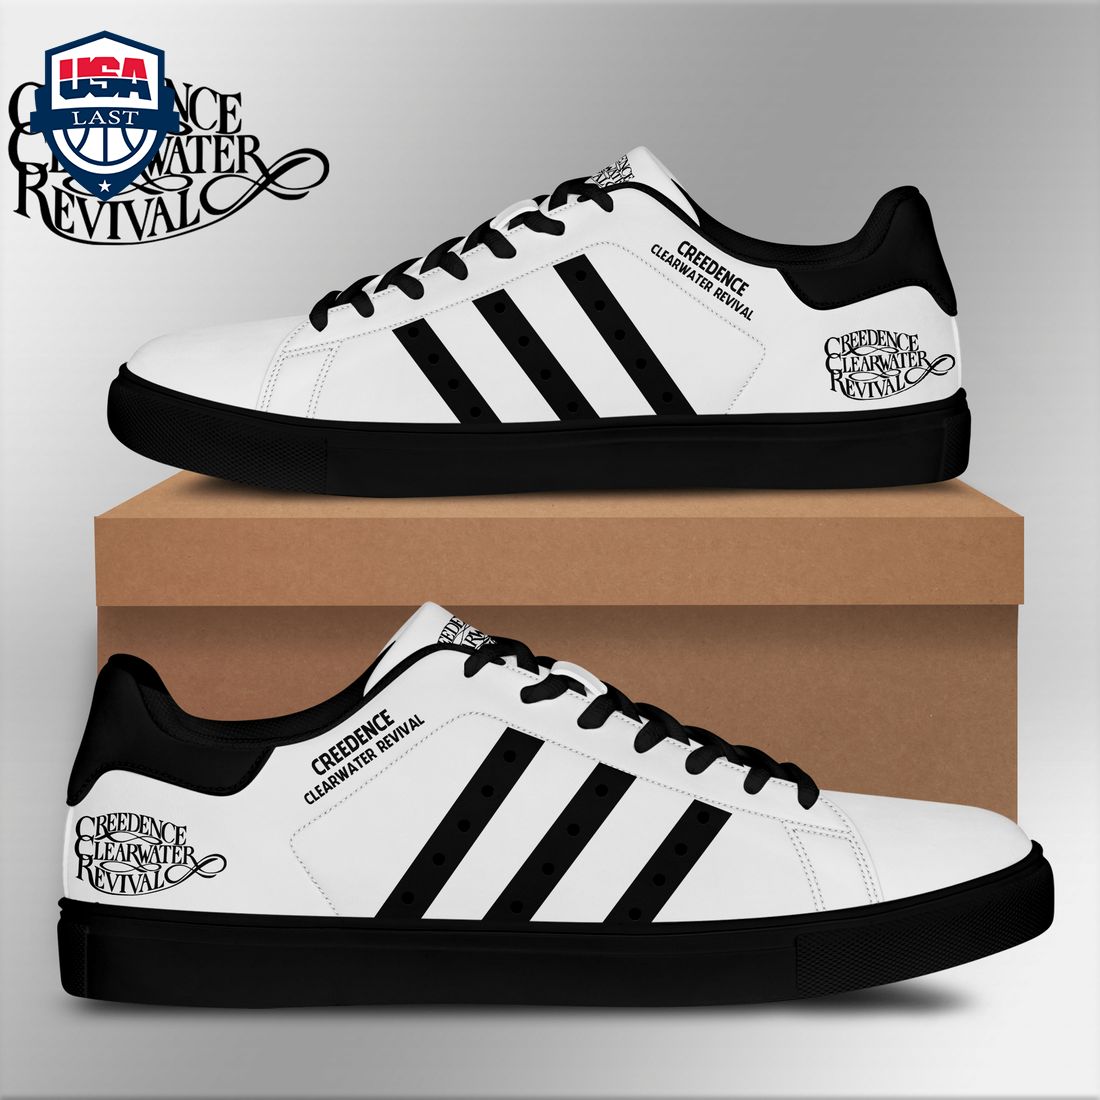 creedence-clearwater-revival-black-stripes-stan-smith-low-top-shoes-1-mHkHR.jpg